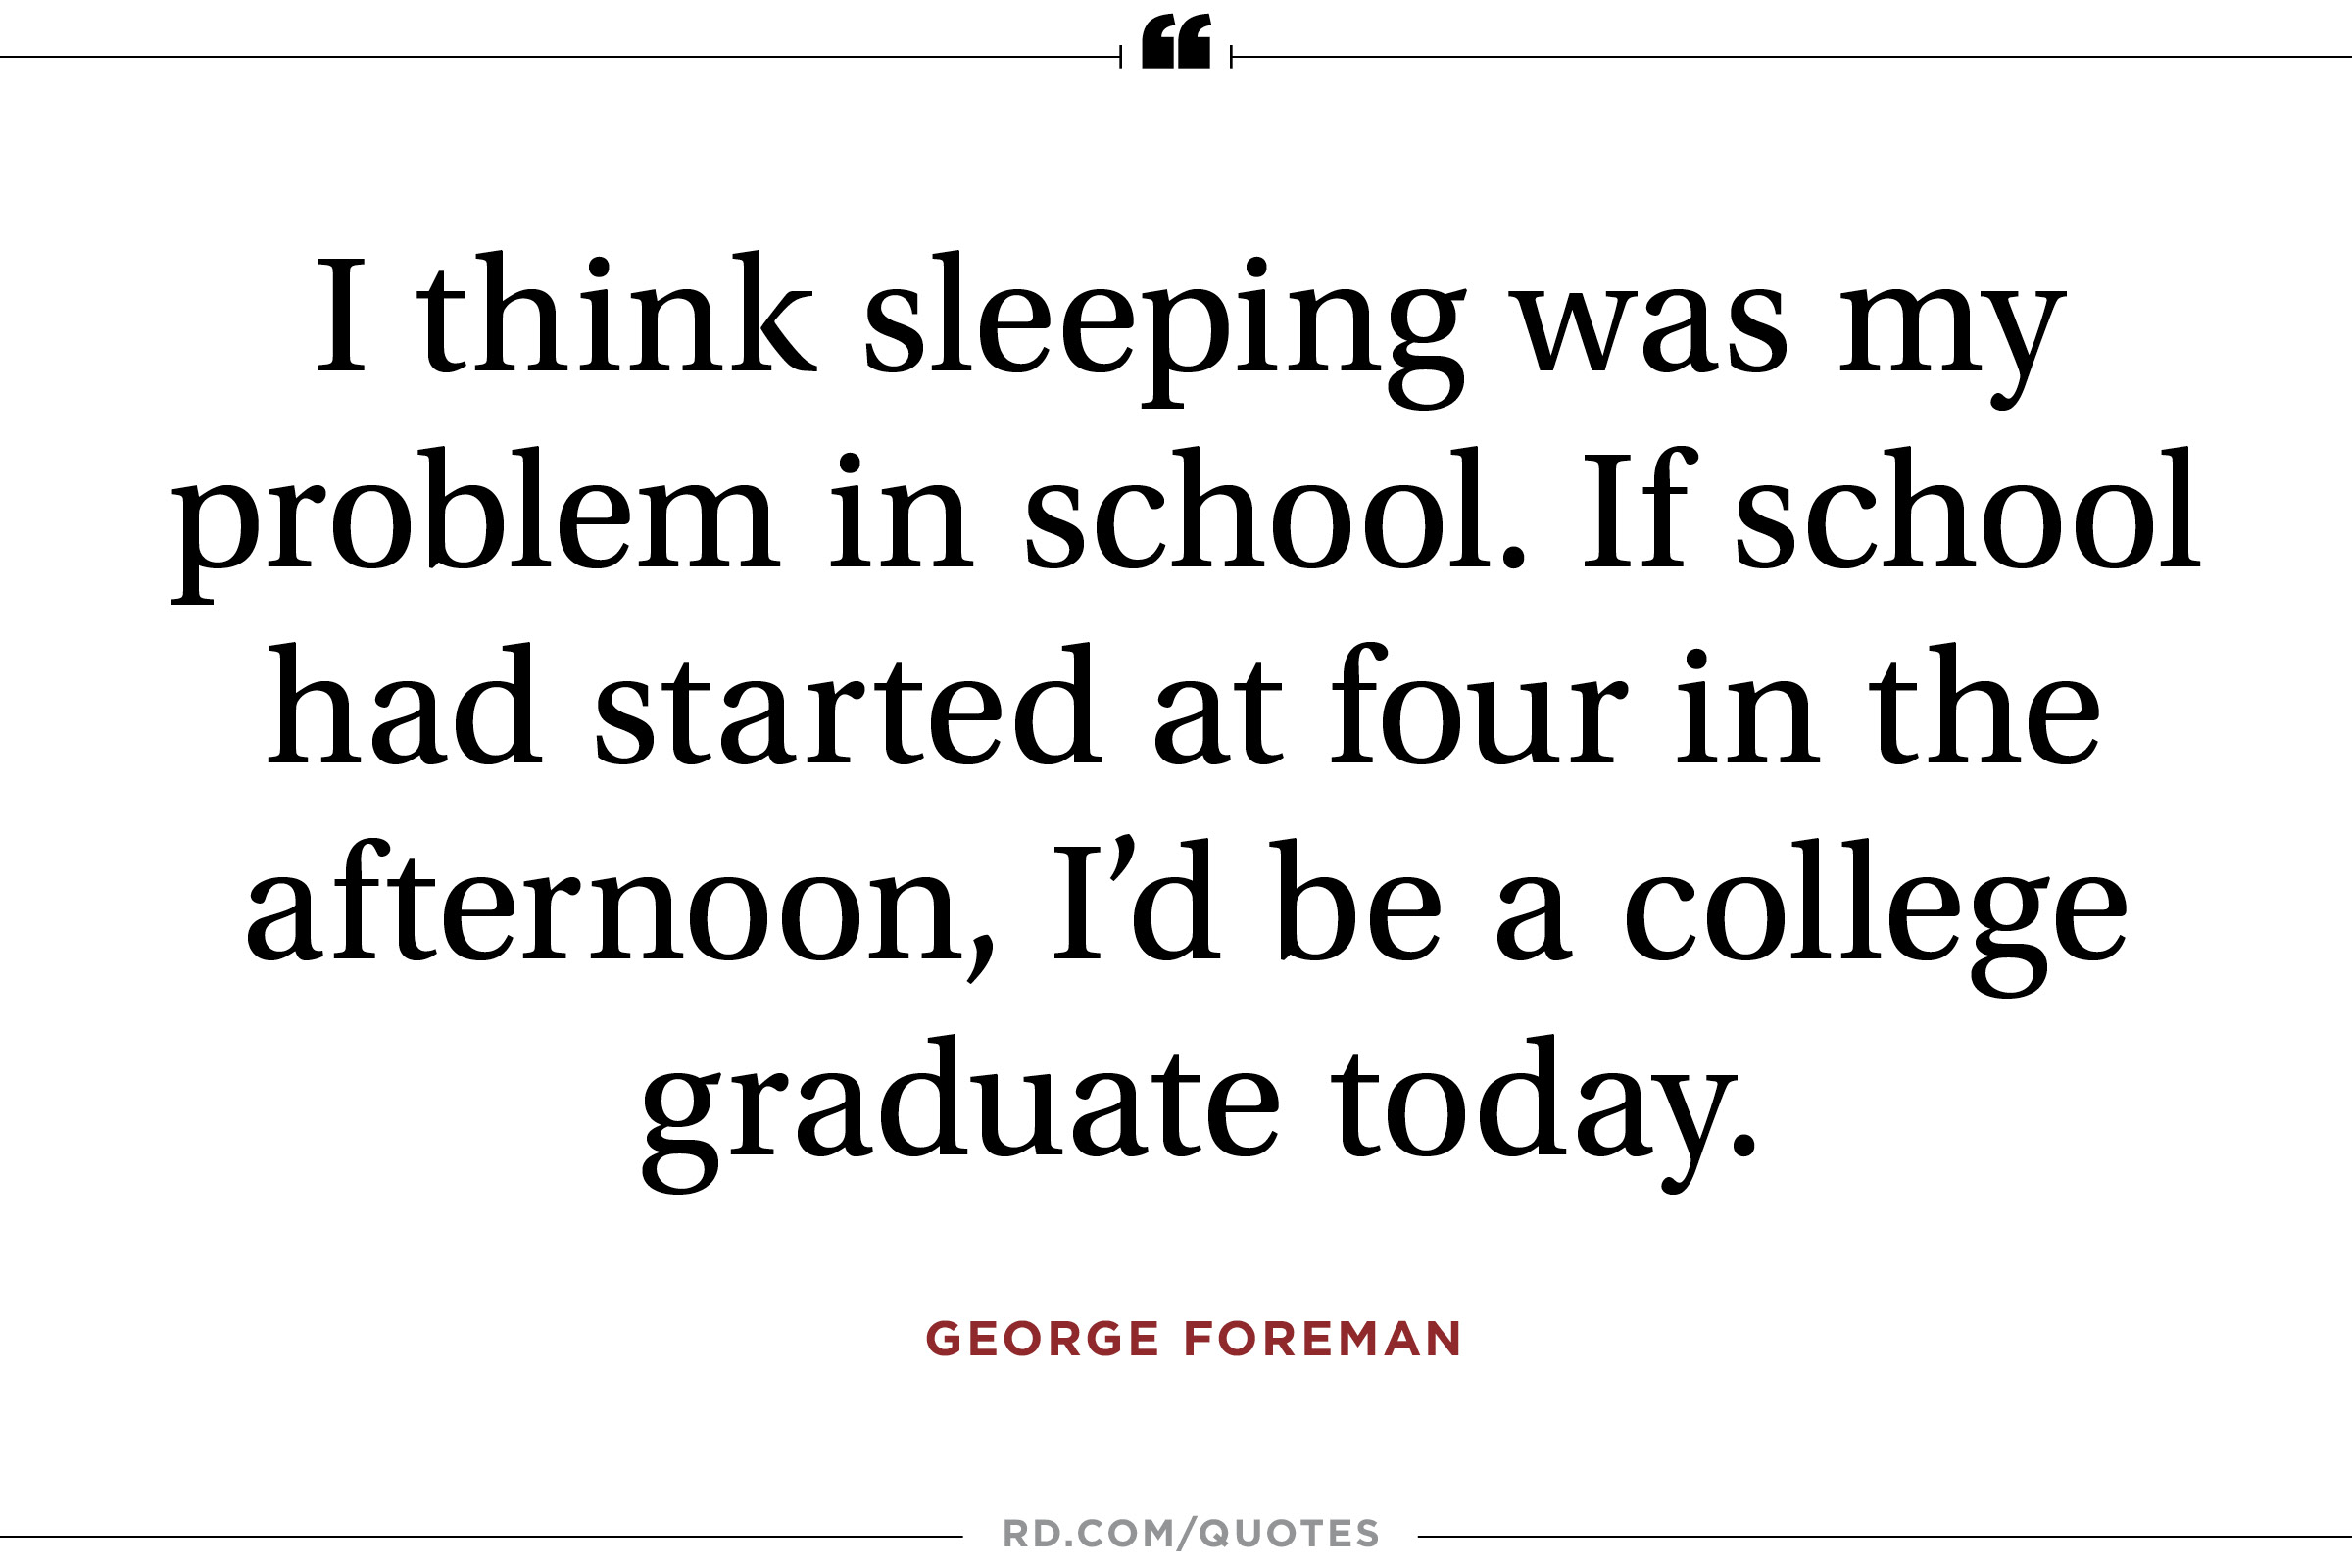 I think sleeping was my problem in school. If school had started at four in the afternoon, I'd be a college graduate today. George Forman